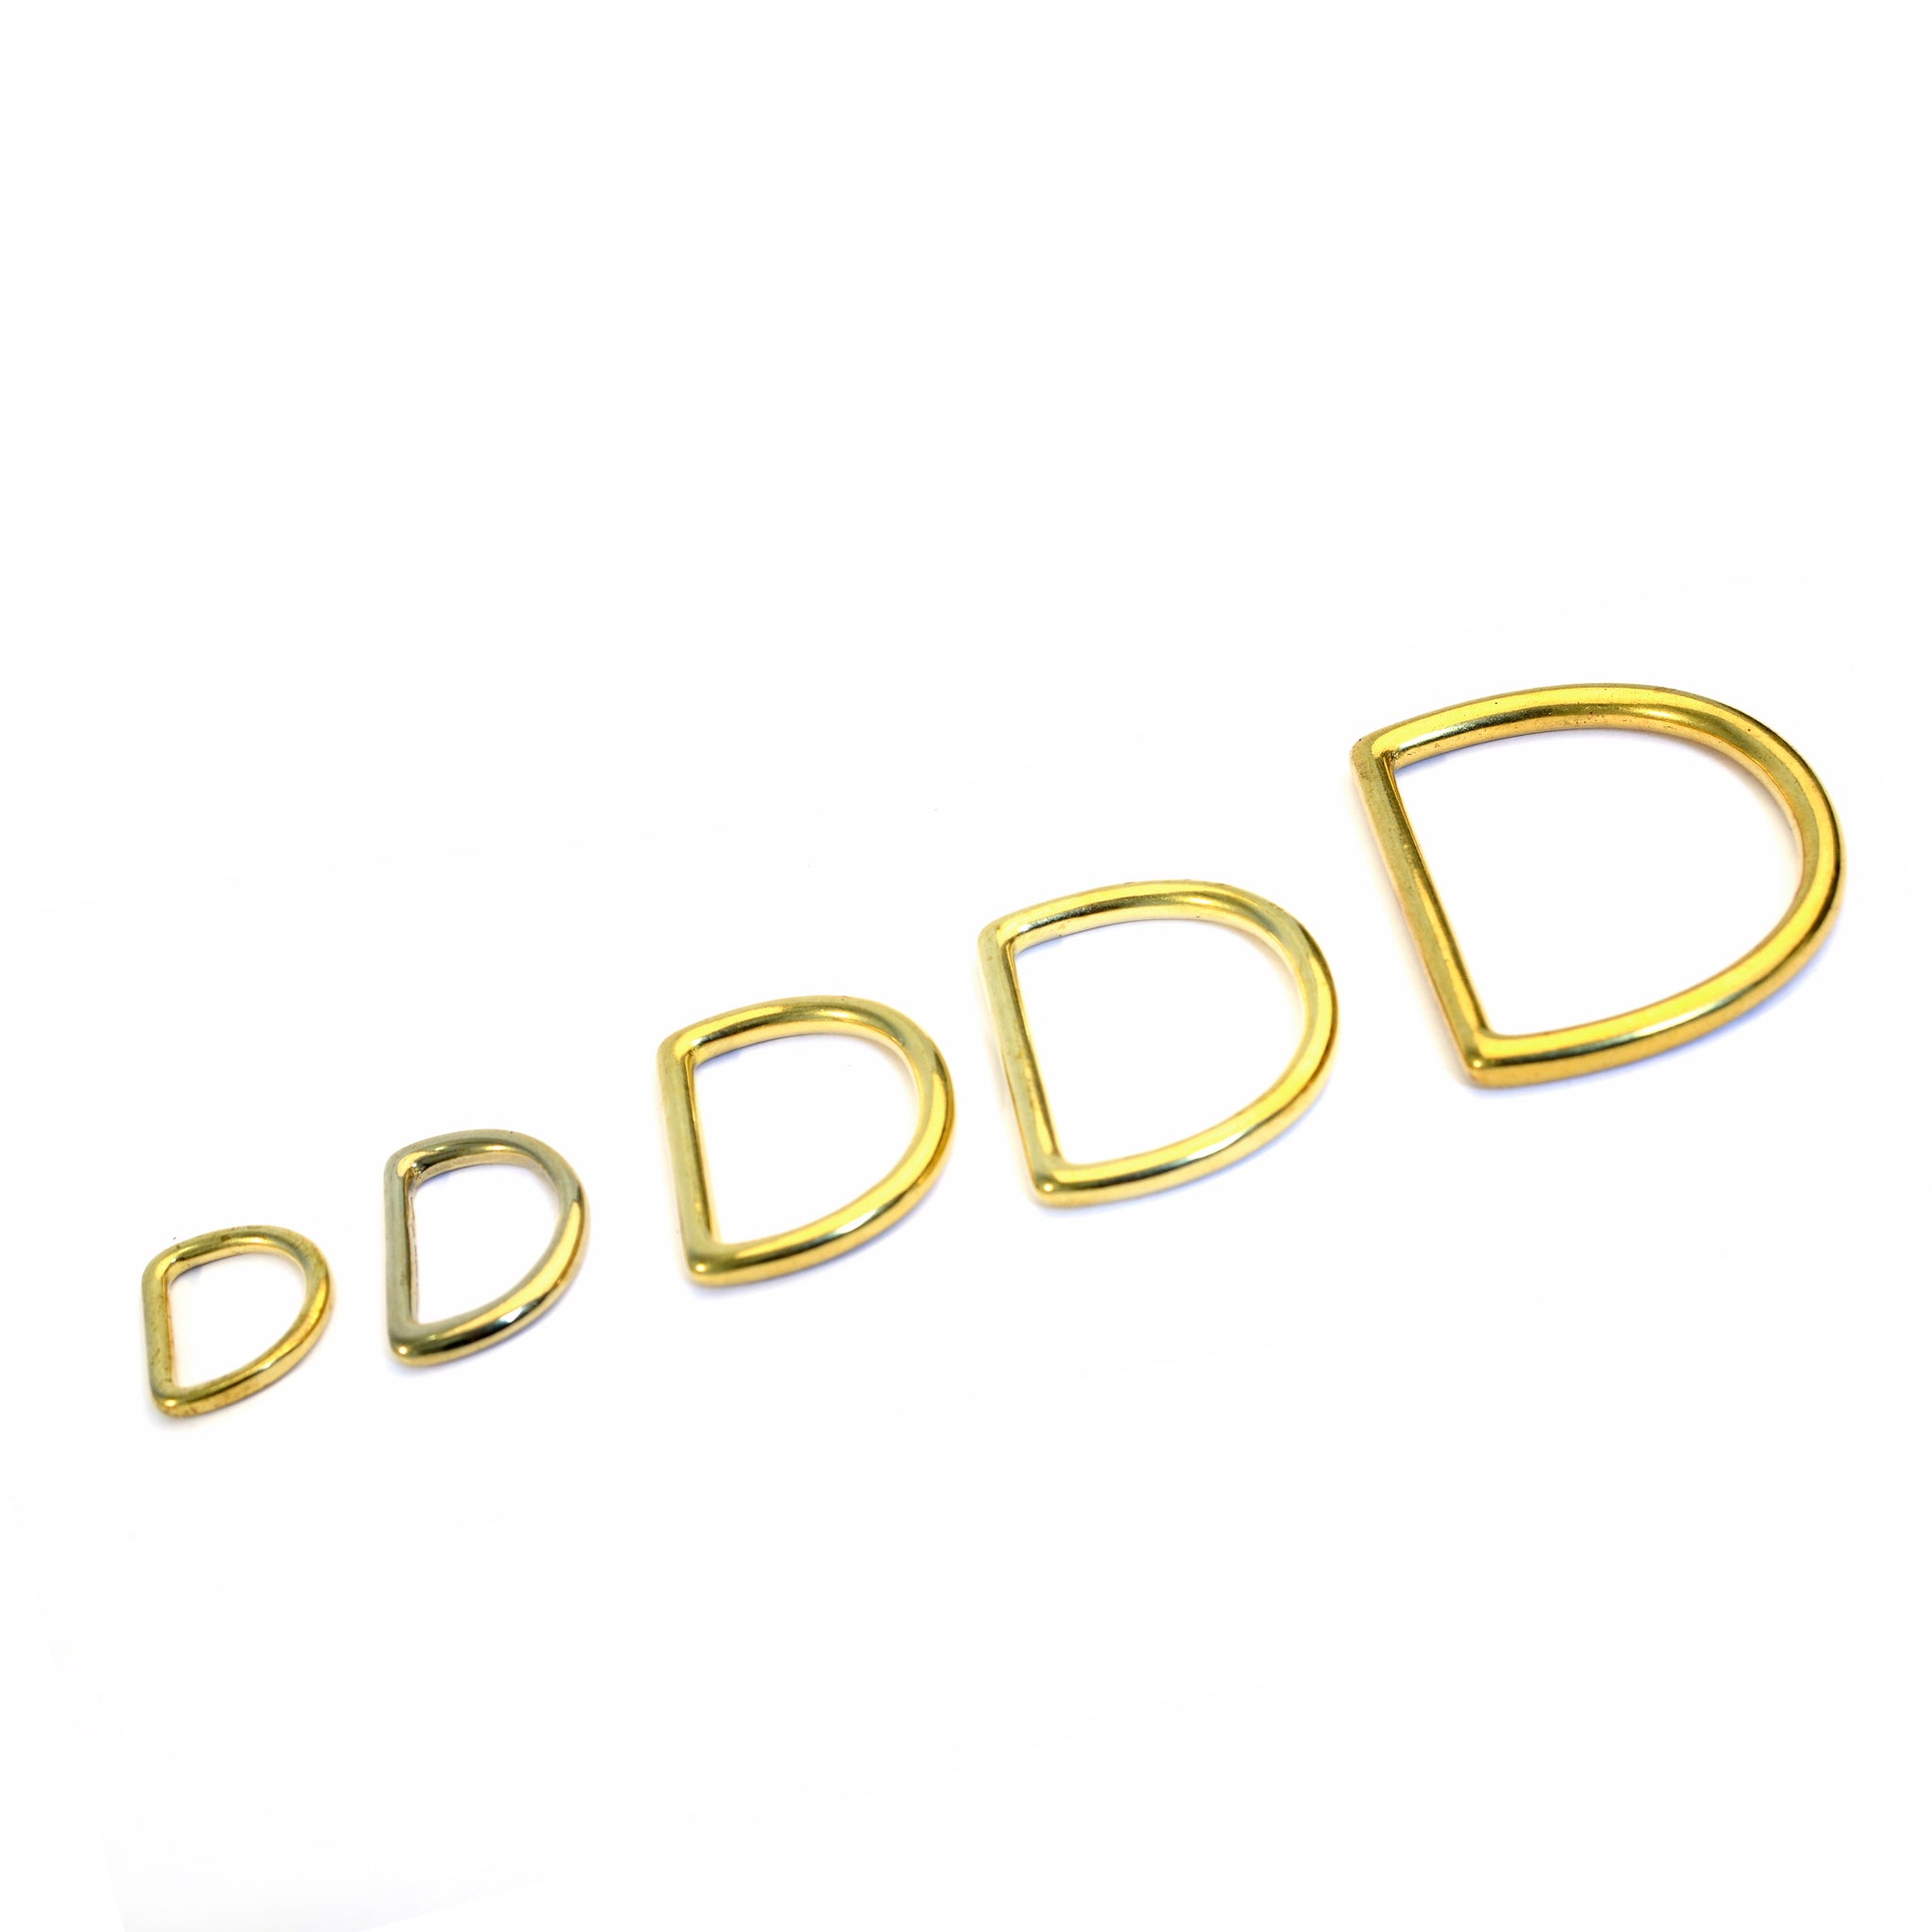 Solid Brass Dee 'D' Rings from Identity Leathercraft